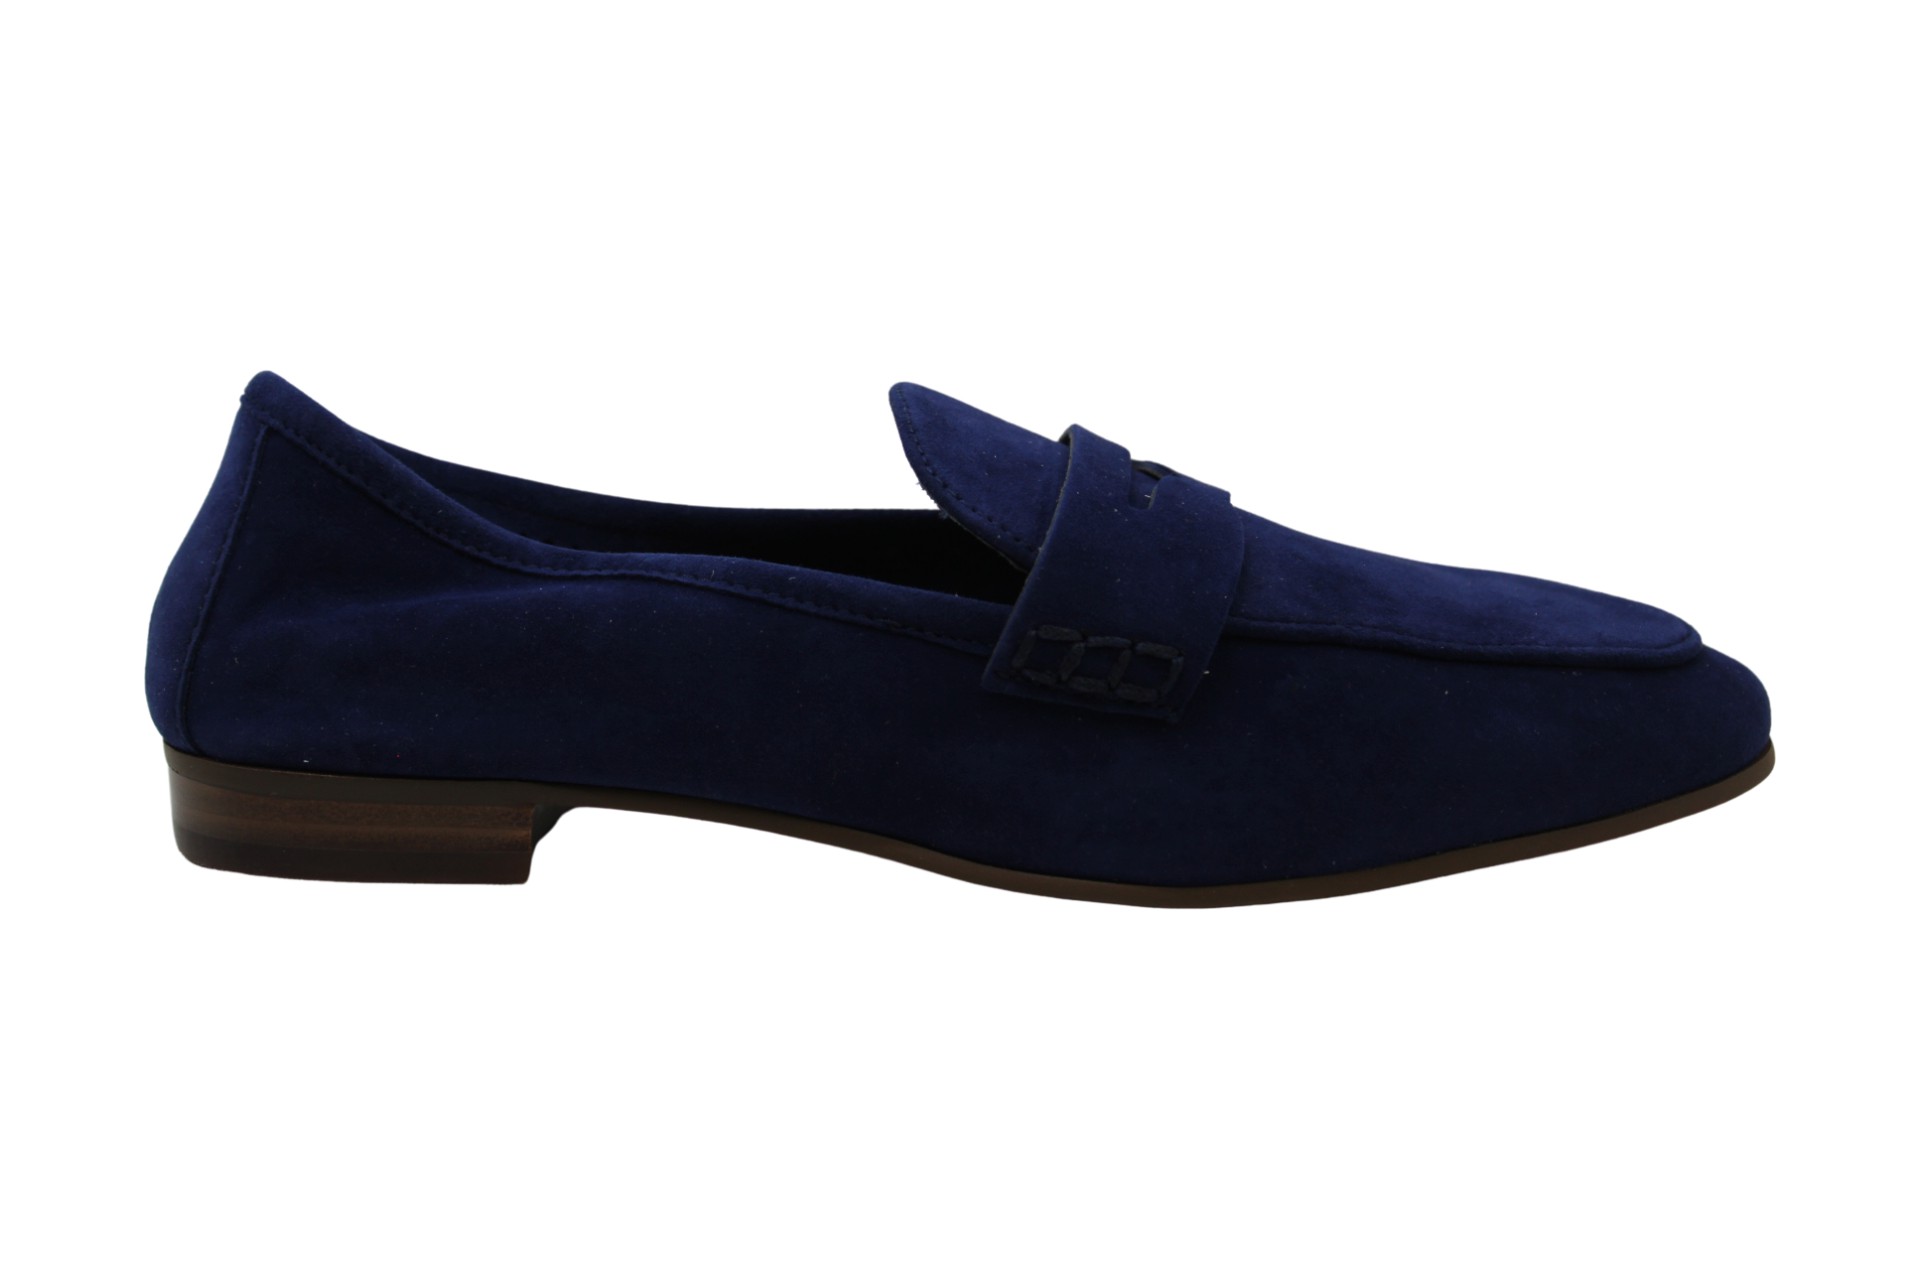 Vince Camuto Womens Loafers & SlipOns in Blue Color, Size 6 FRR | eBay